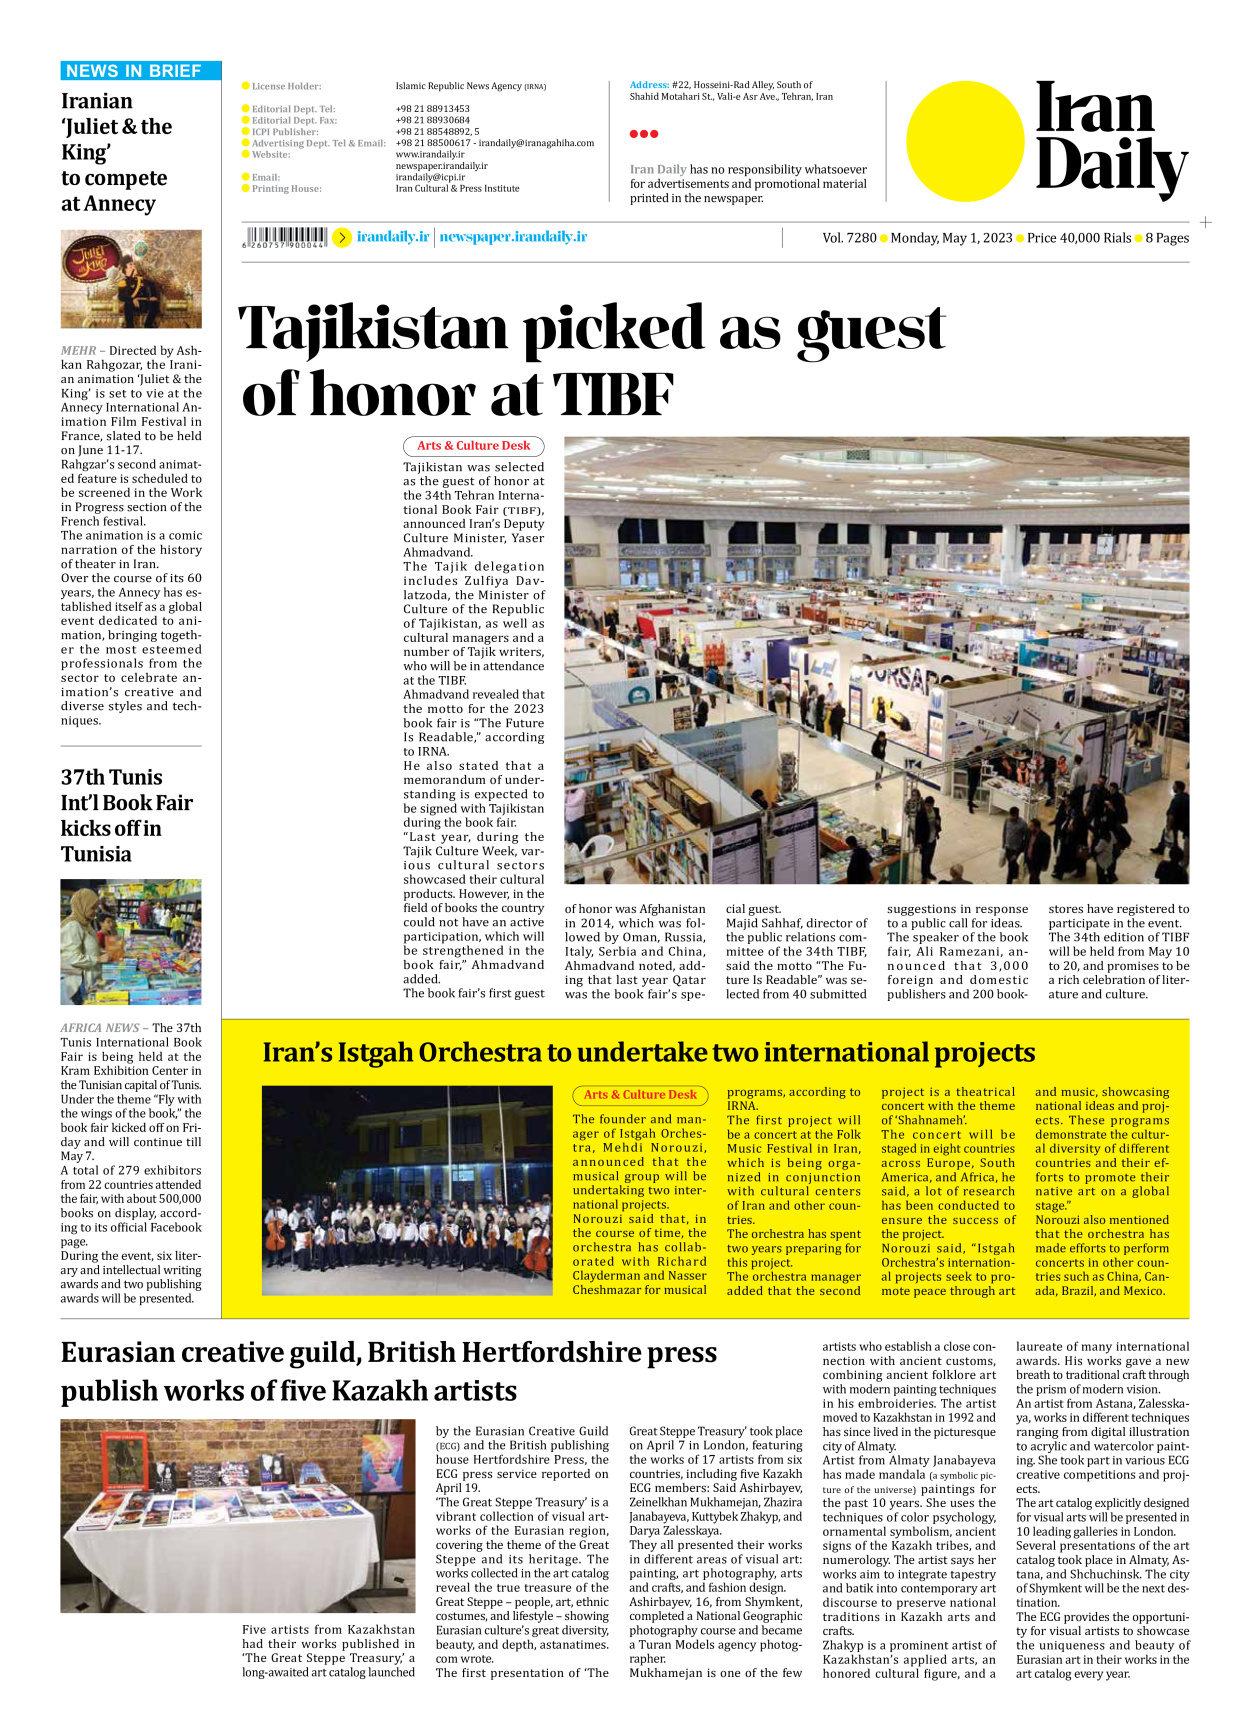 Iran Daily - Number Seven Thousand Two Hundred and Eighty - 01 May 2023 - Page 8